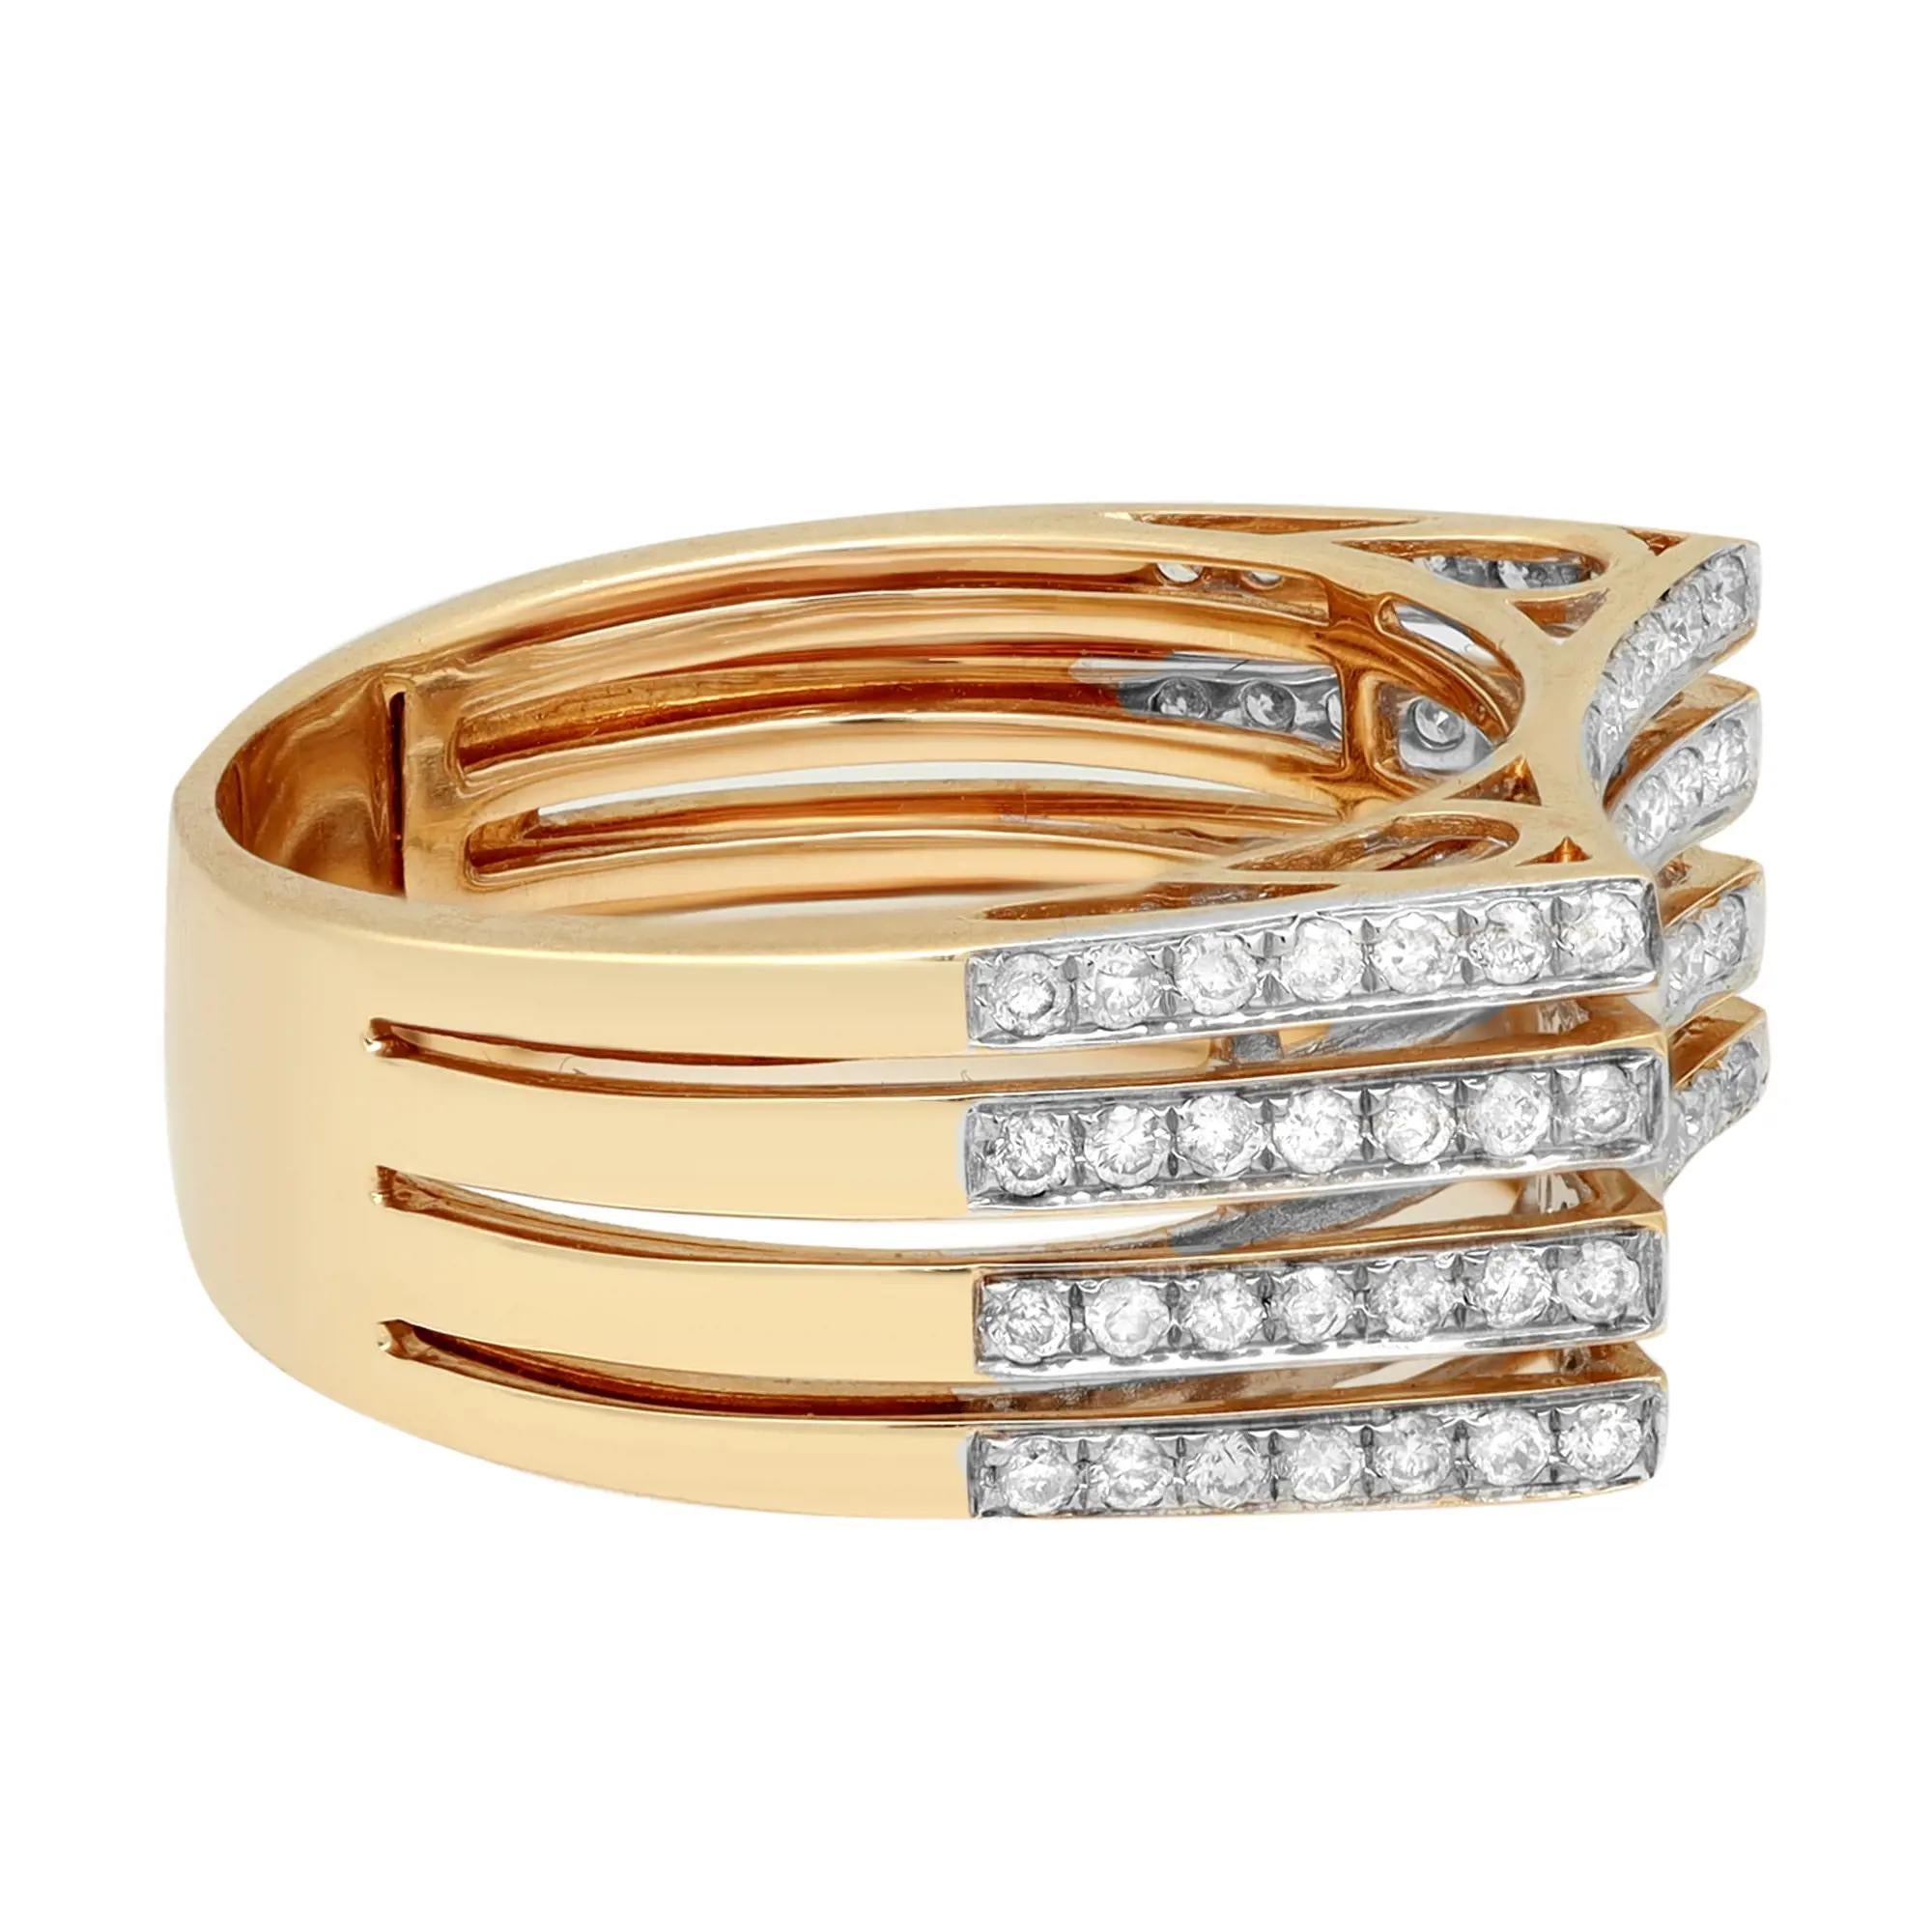 This elegant and classic diamond band ring is crafted in 14k yellow gold. Features four rows of pave set round brilliant cut diamonds weighing 0.72 carat. Diamond color I and SI-I clarity.  Ring width: 9mm. Ring size: 7.5. Total weight: 5.87 grams.